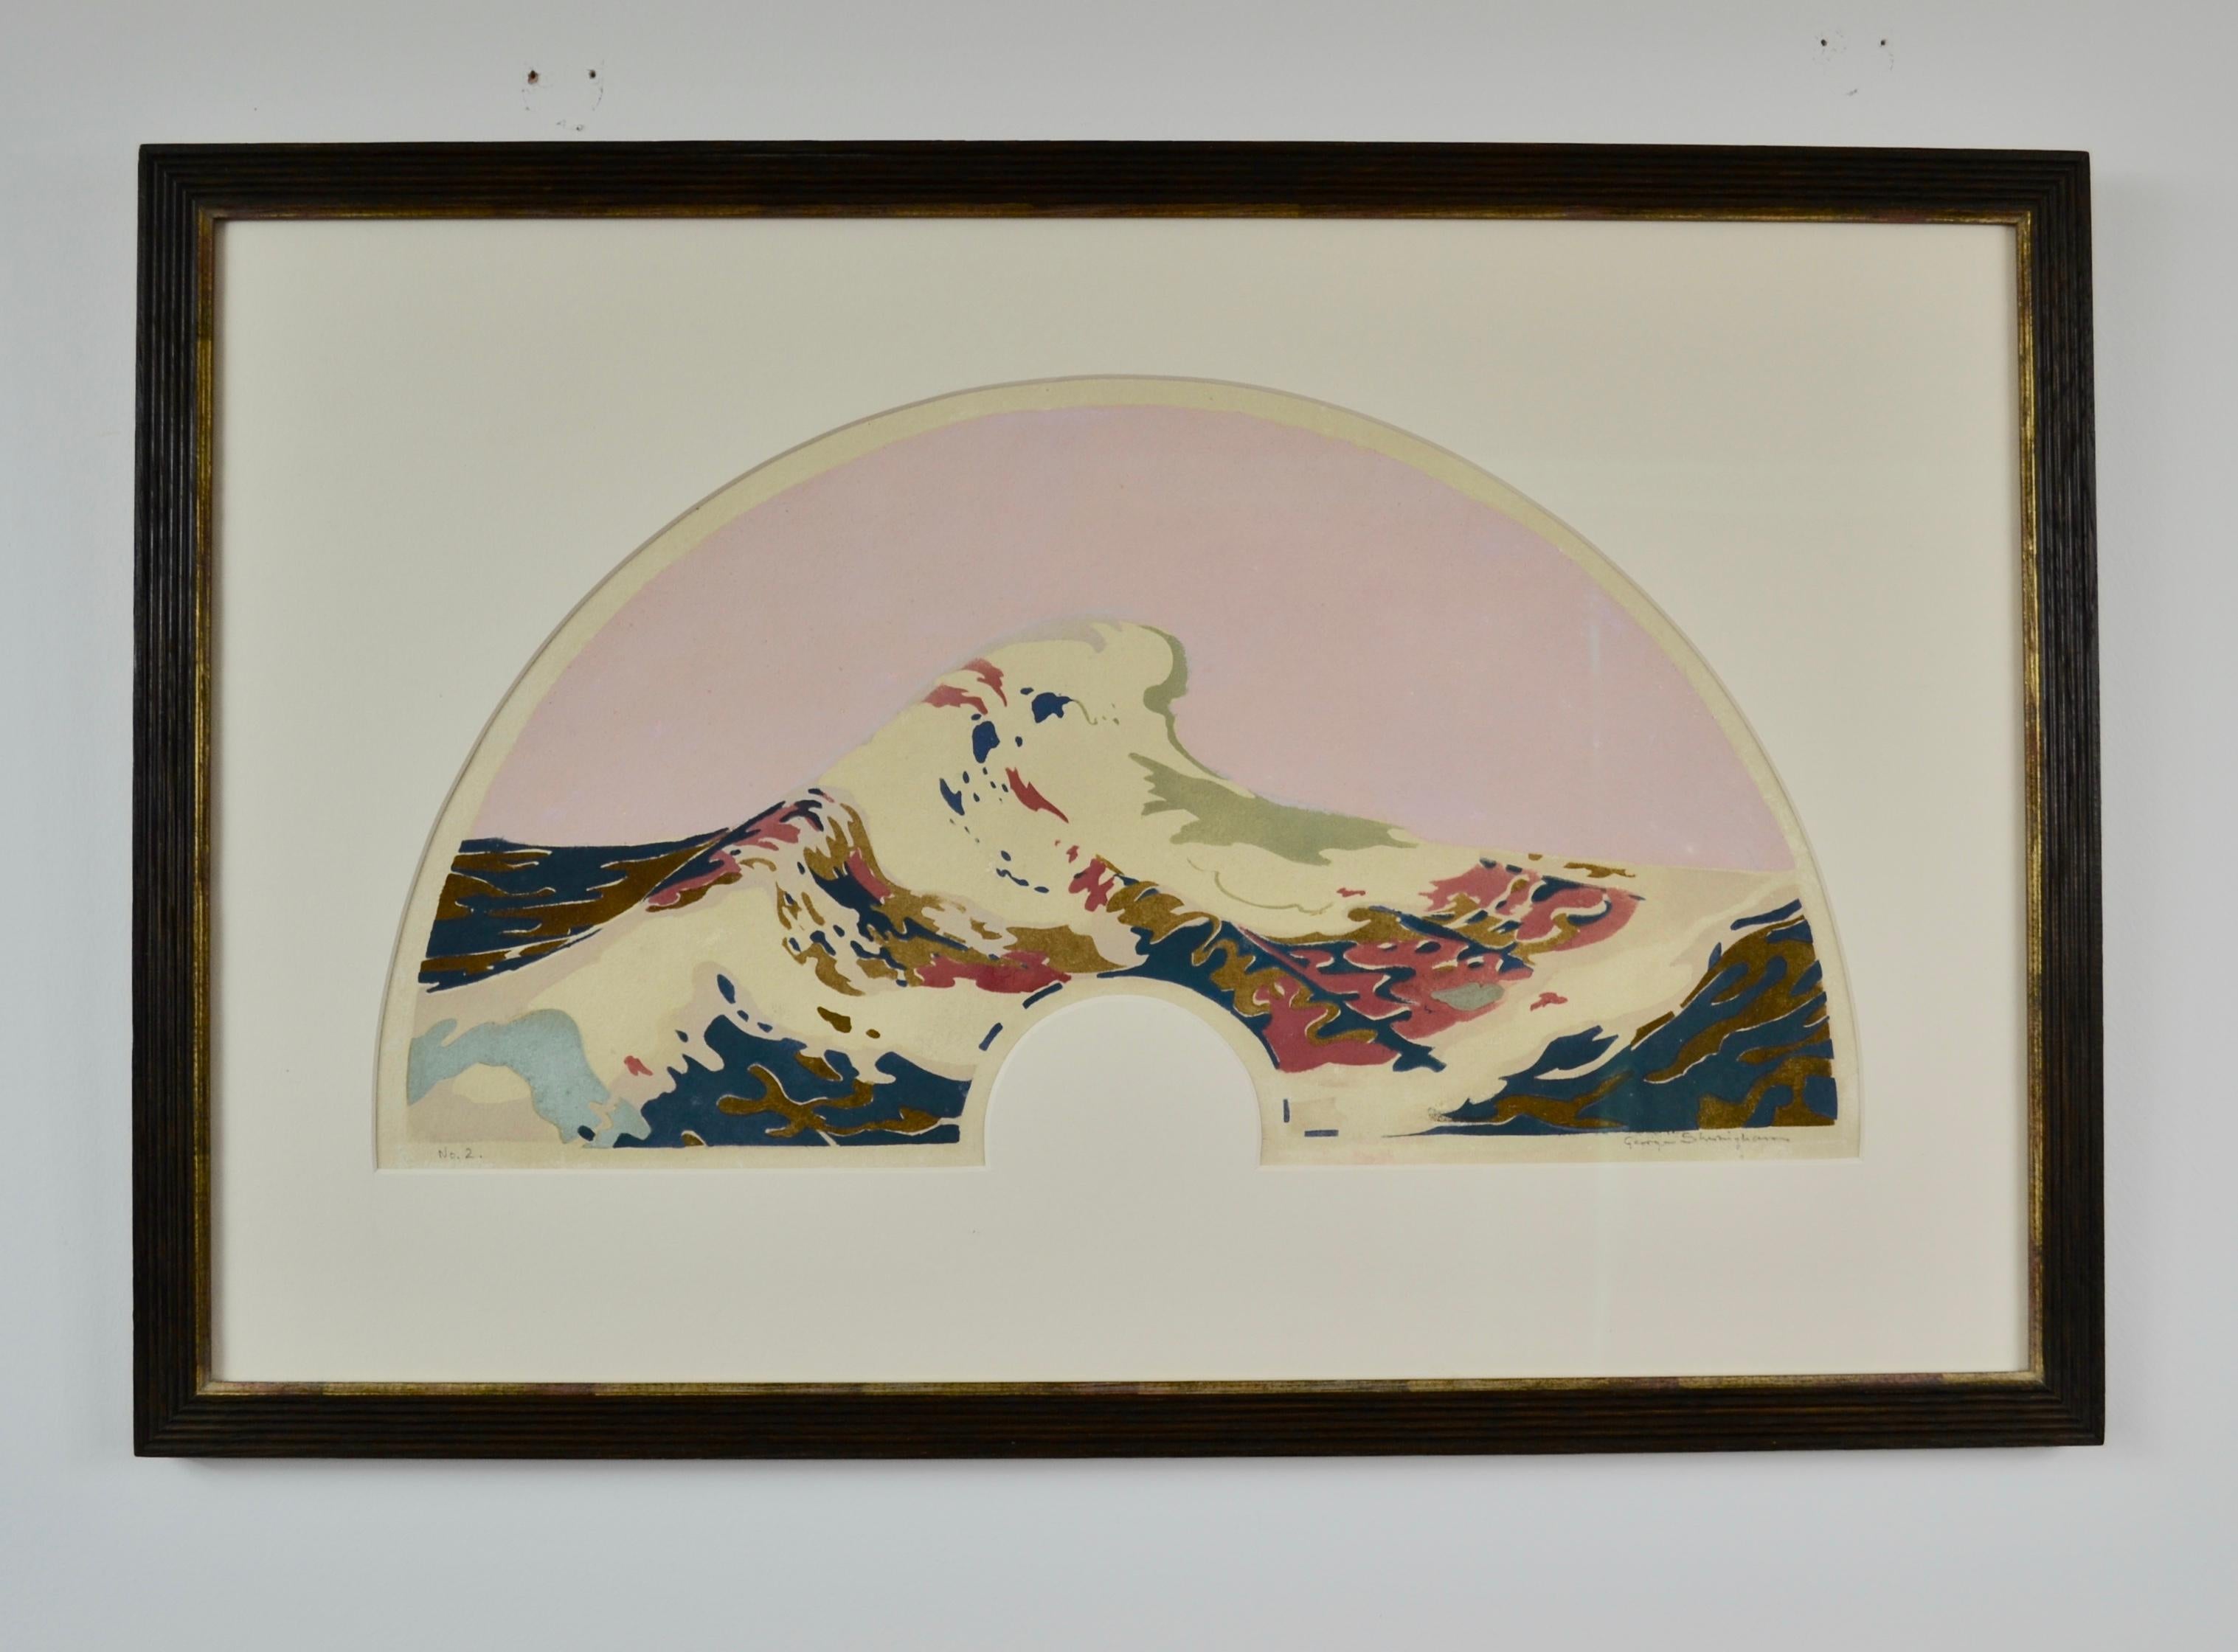 GEORGE SHERINGHAM
 (1884-1937)

The Wave

Signed and numbered 2
Stencil print with 9 plates, designed and cut by the artist, fan shaped

23 by 42 cm., 9 by 16 ½ in.
(frame size 37.5 by 22 cm., 14 ¾ by 8 ¾ in.)

Sheringham was born in London and